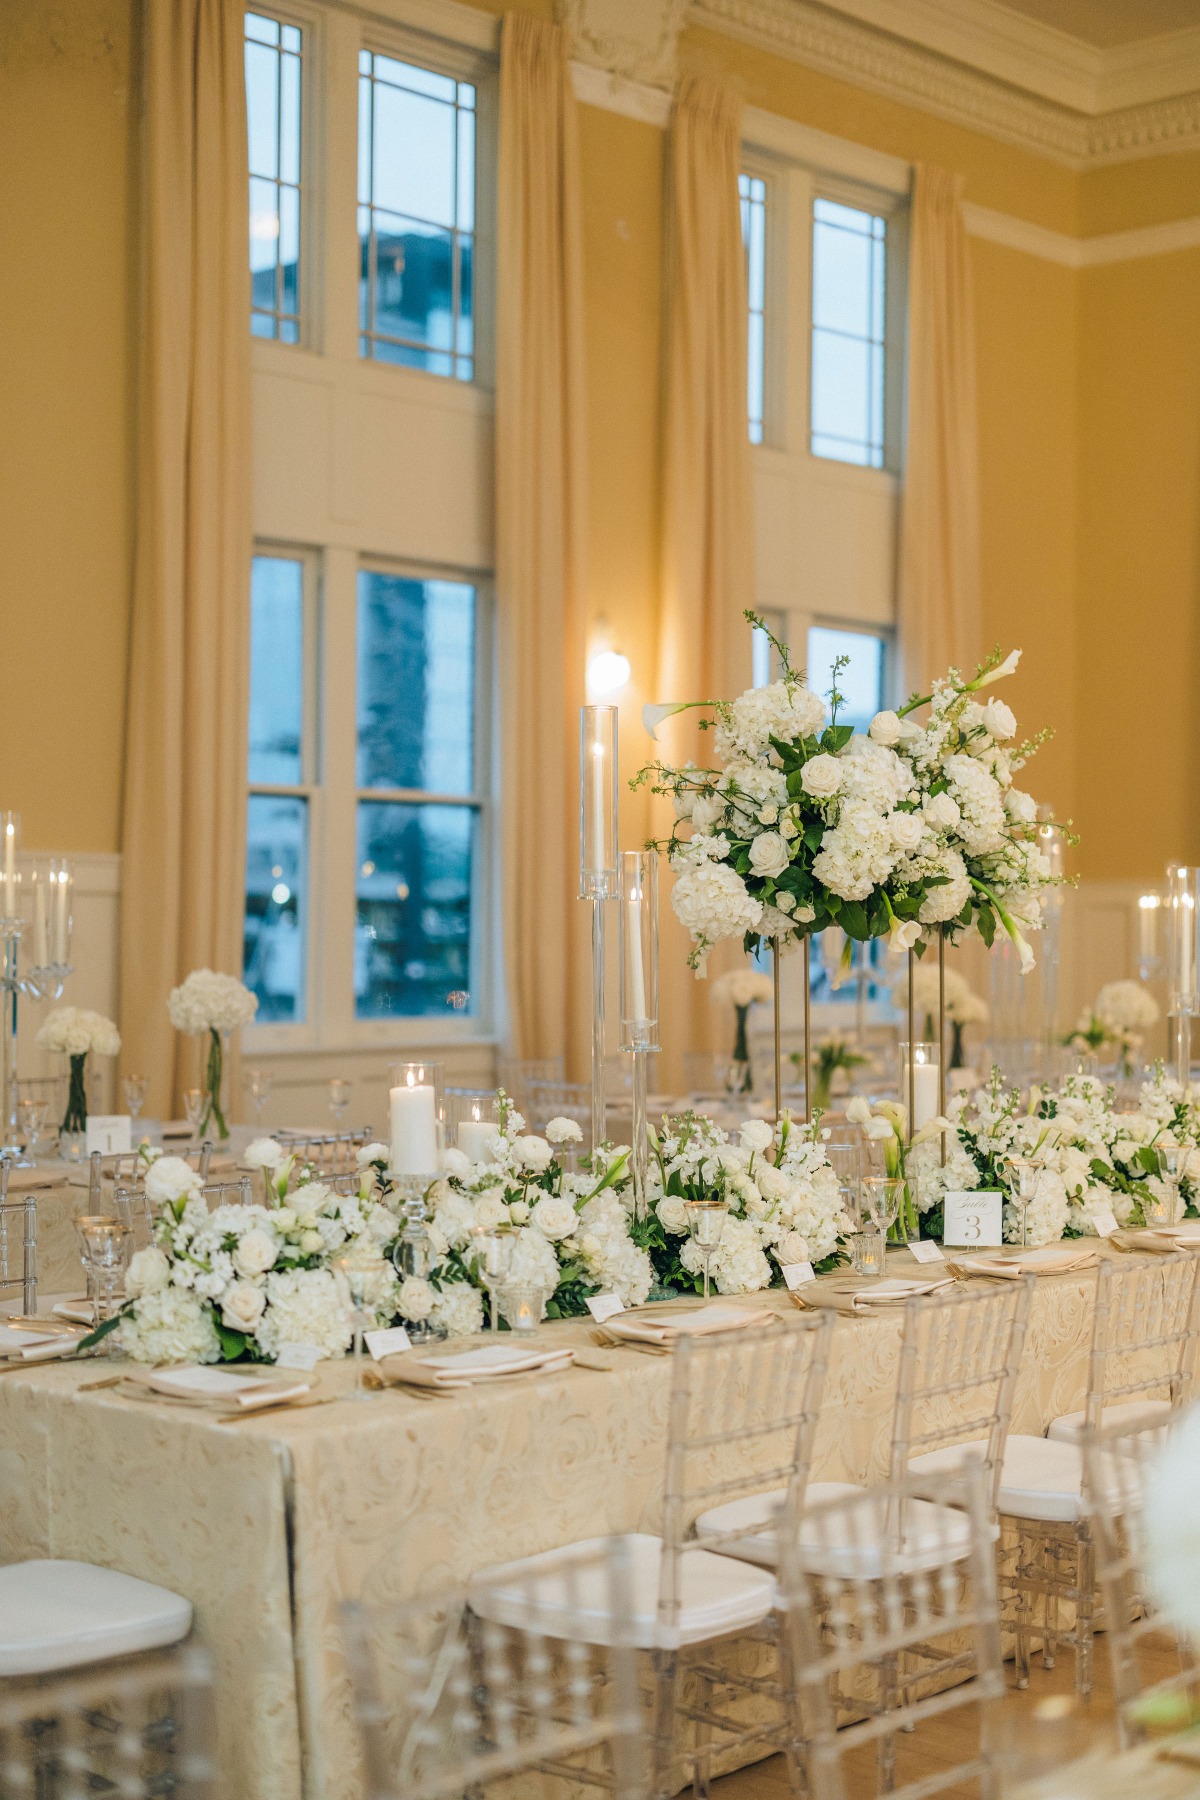 classic white and green floral arrangements